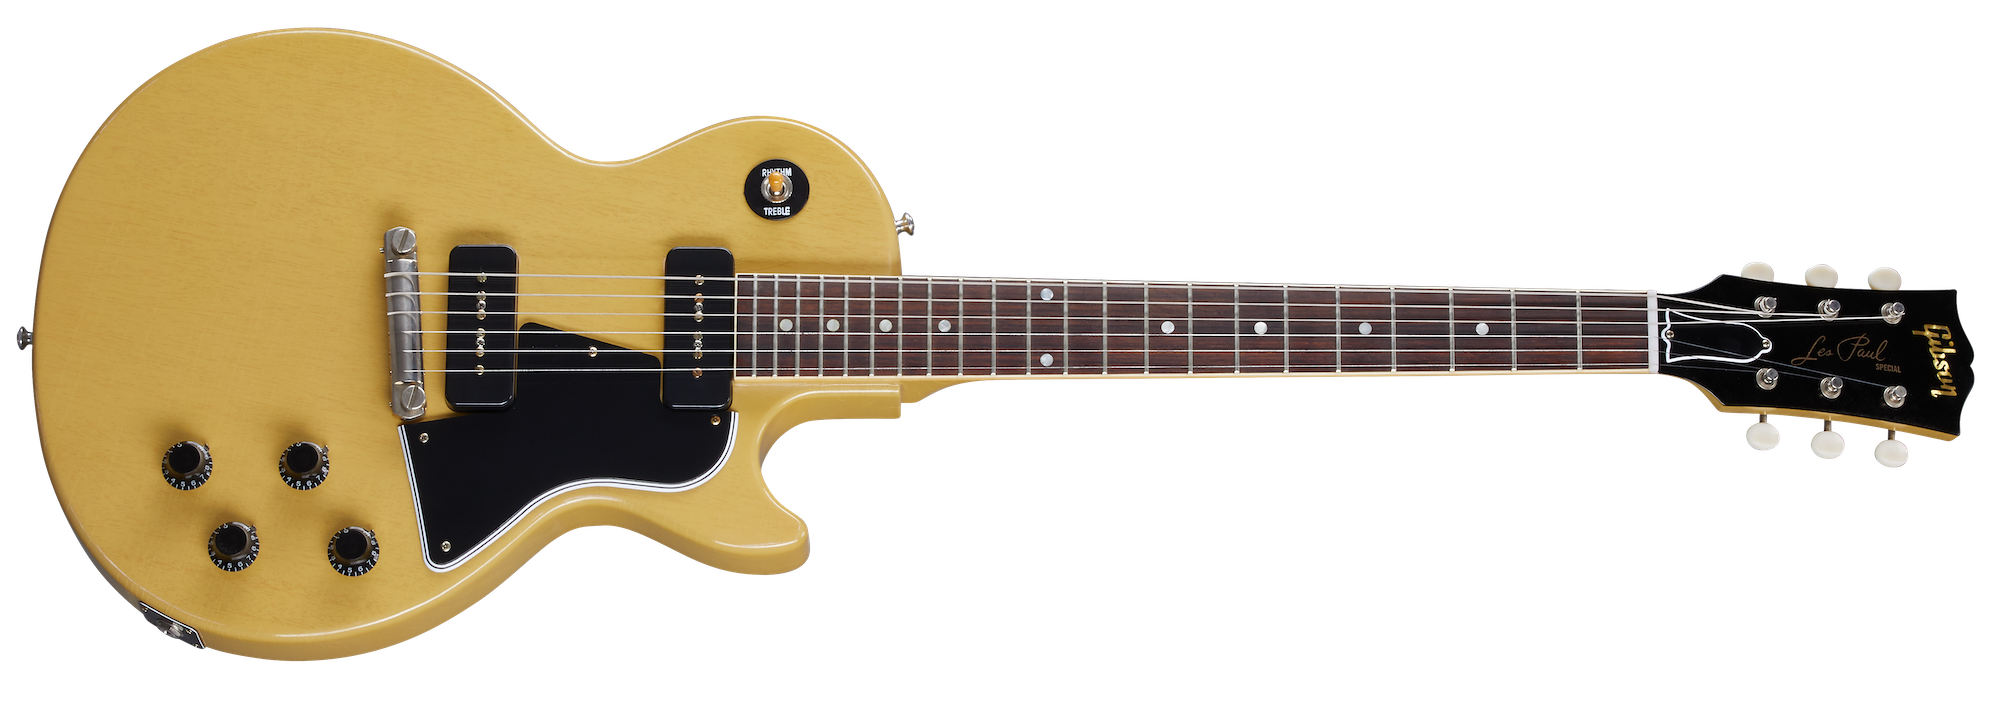 1957 Les Paul Special Single Cut Reissue Ultra Light Aged TV Yellow